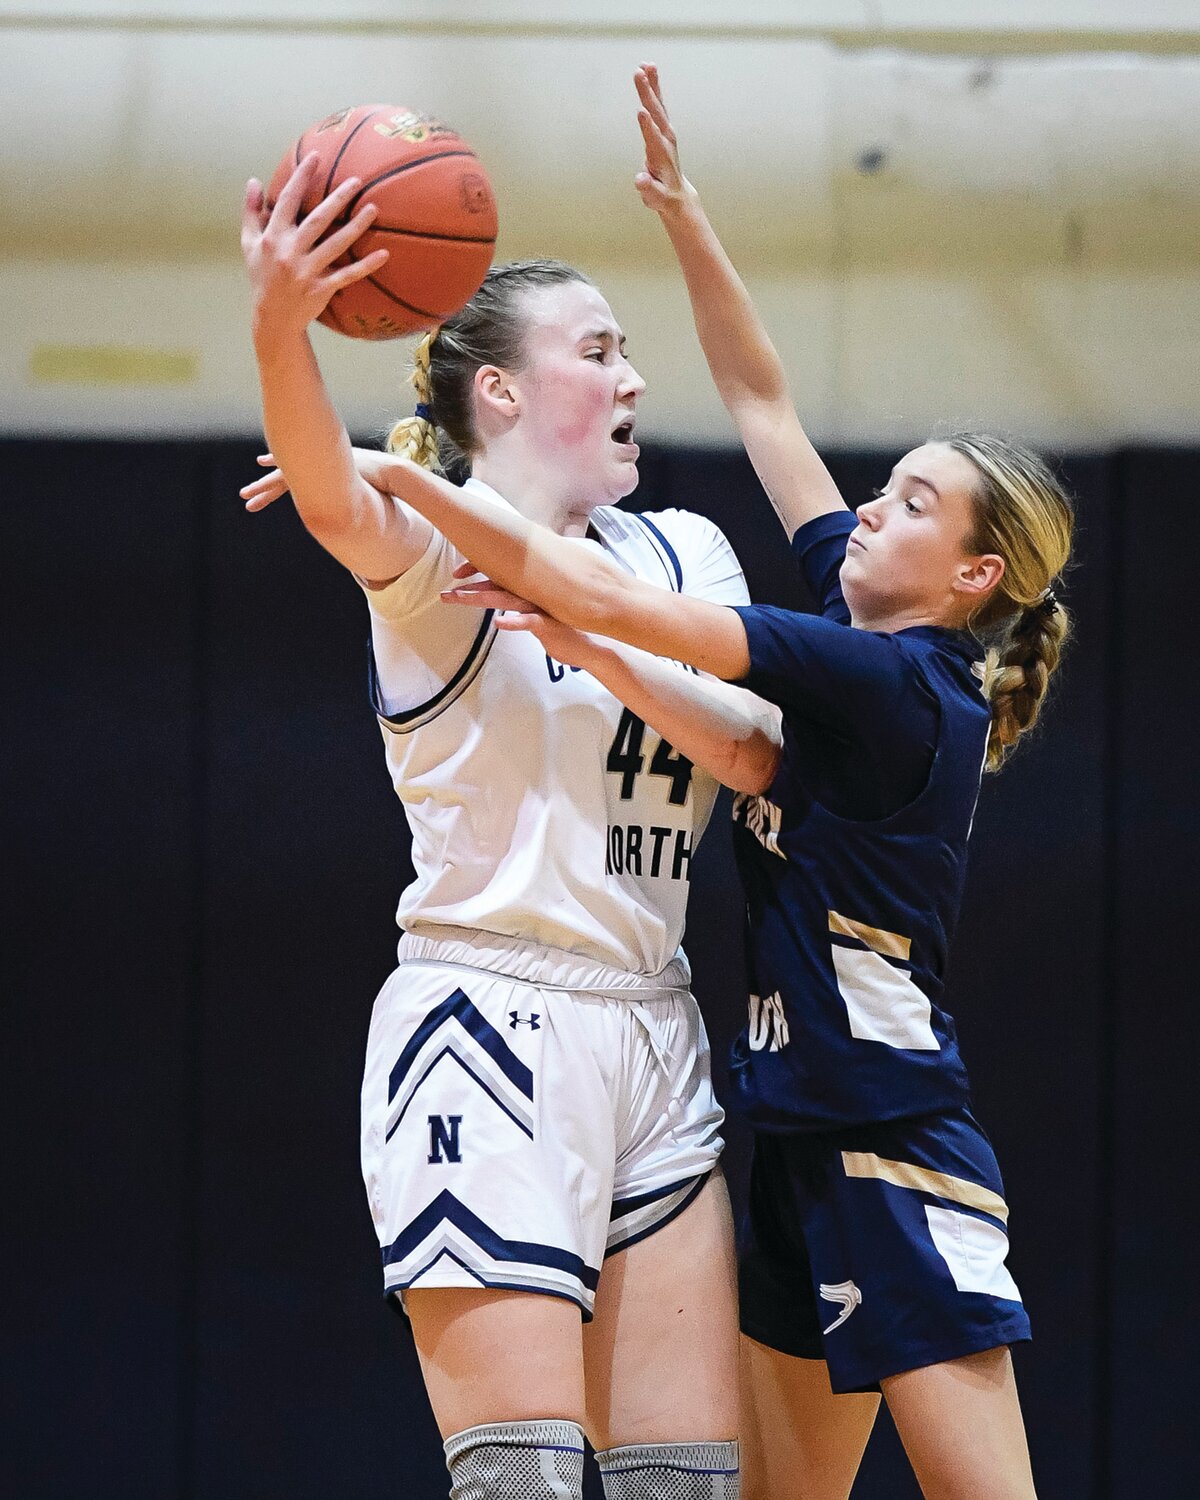 Council Rock North’s Ruth O’Keeffe looks to pass around the close defense of Council Rock South’s Lily Bross.